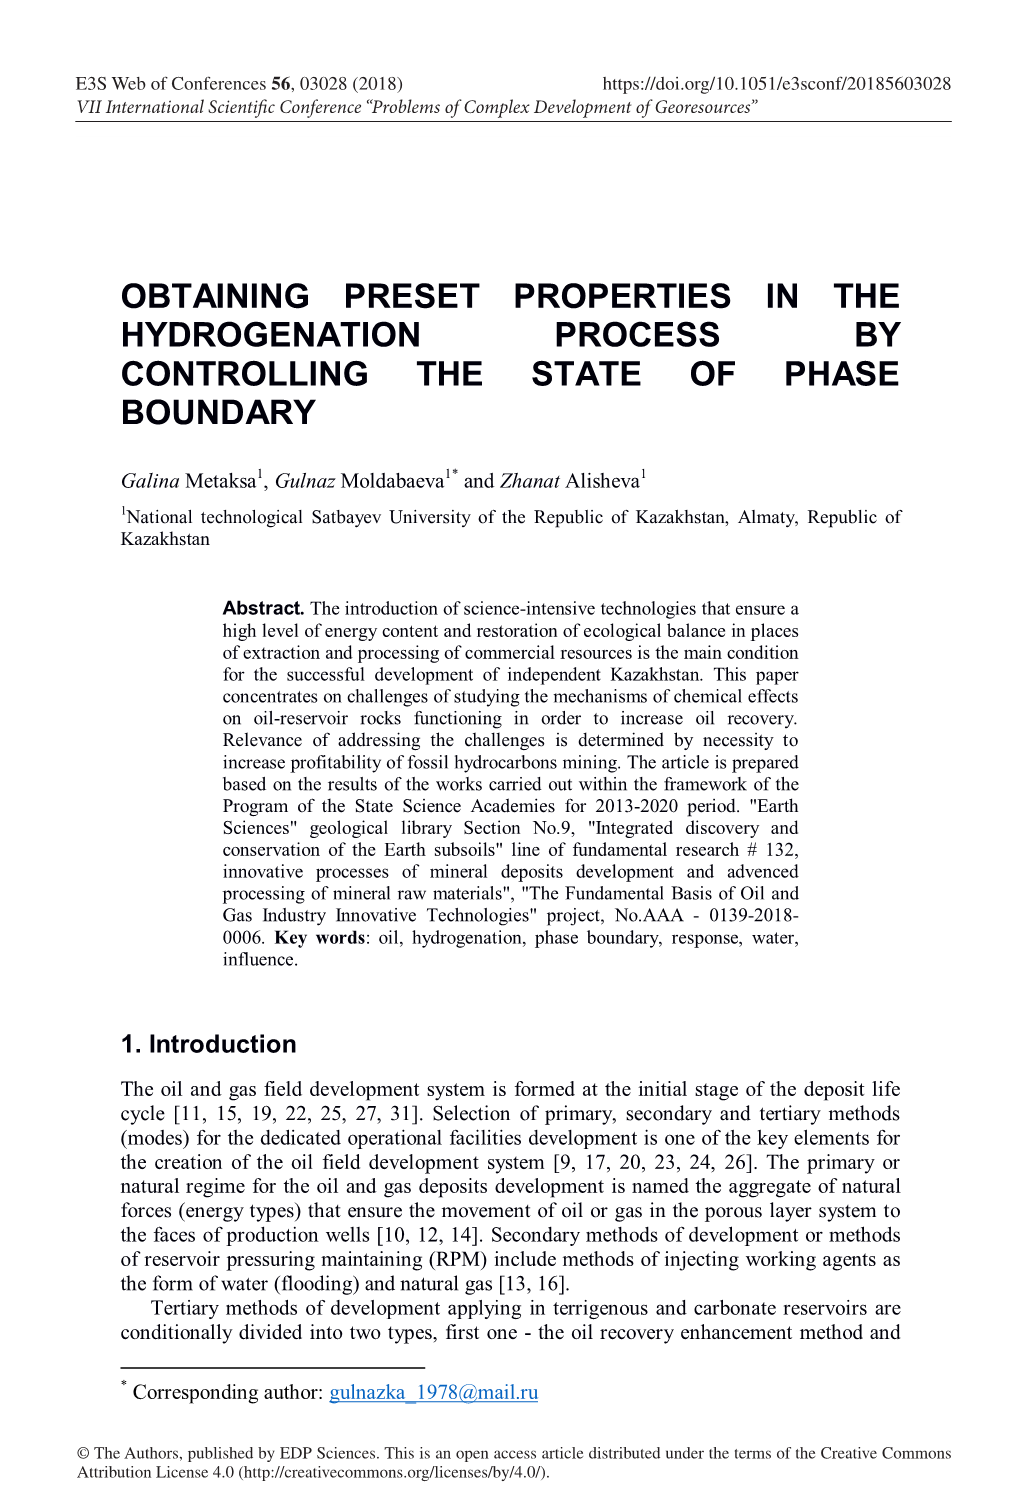 Obtaining Preset Properties in the Hydrogenation Process by Controlling the State of Phase Boundary